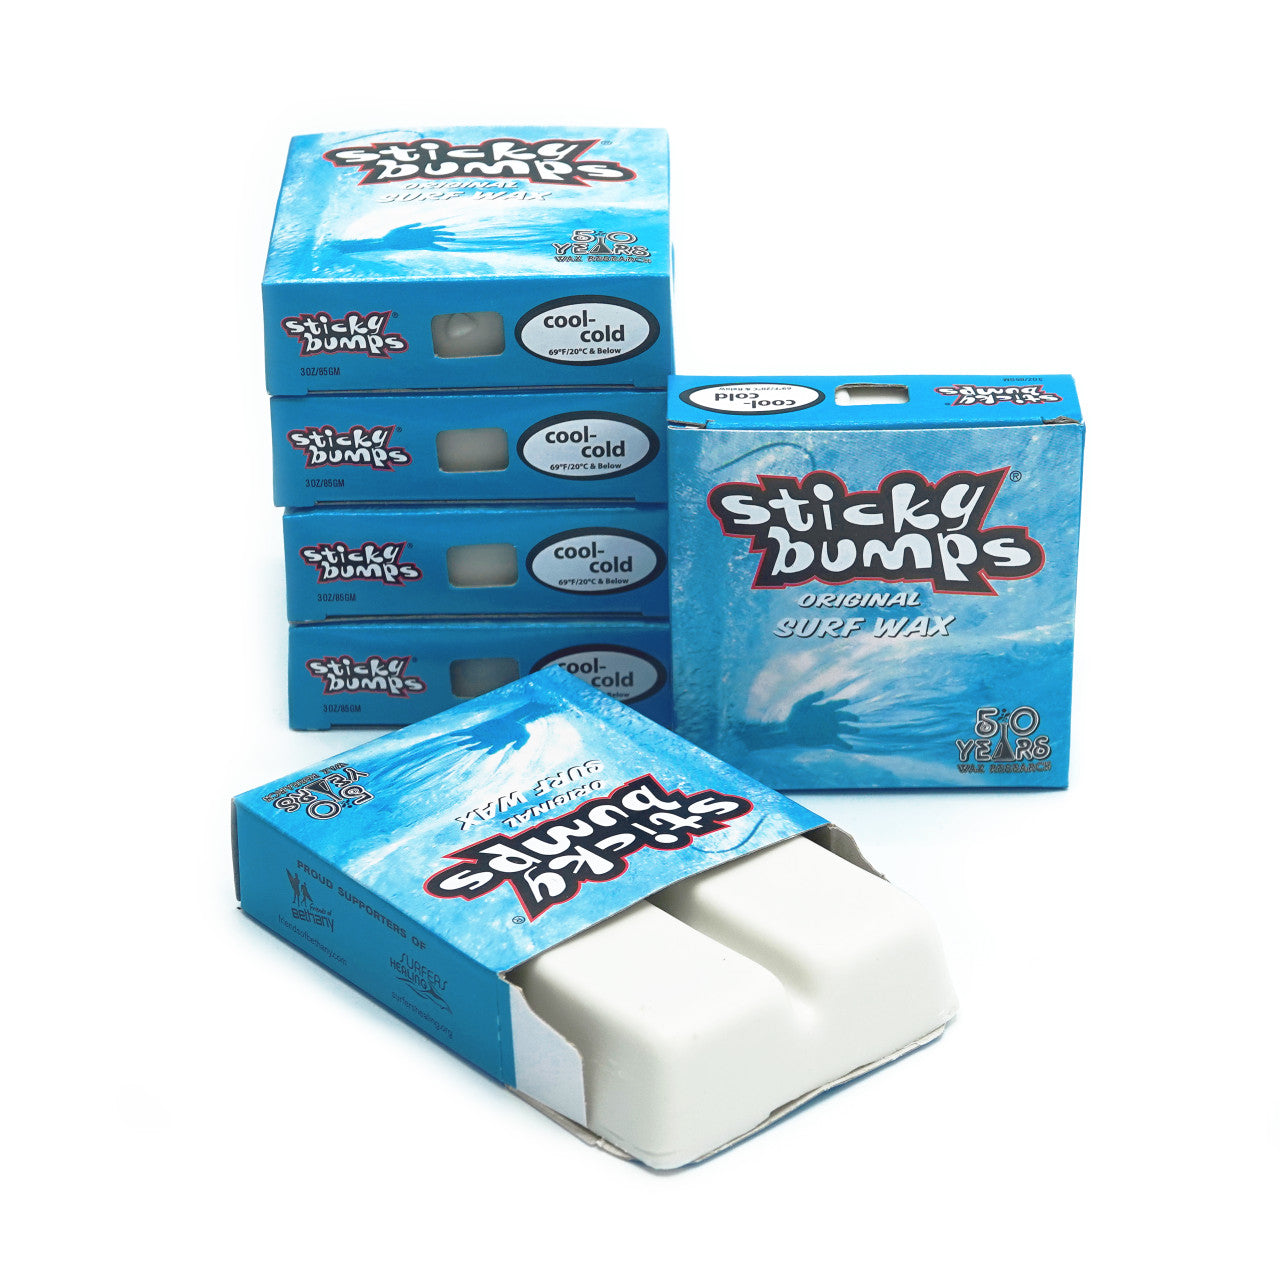 Sticky Bumps Surf Wax, Cool/Cold